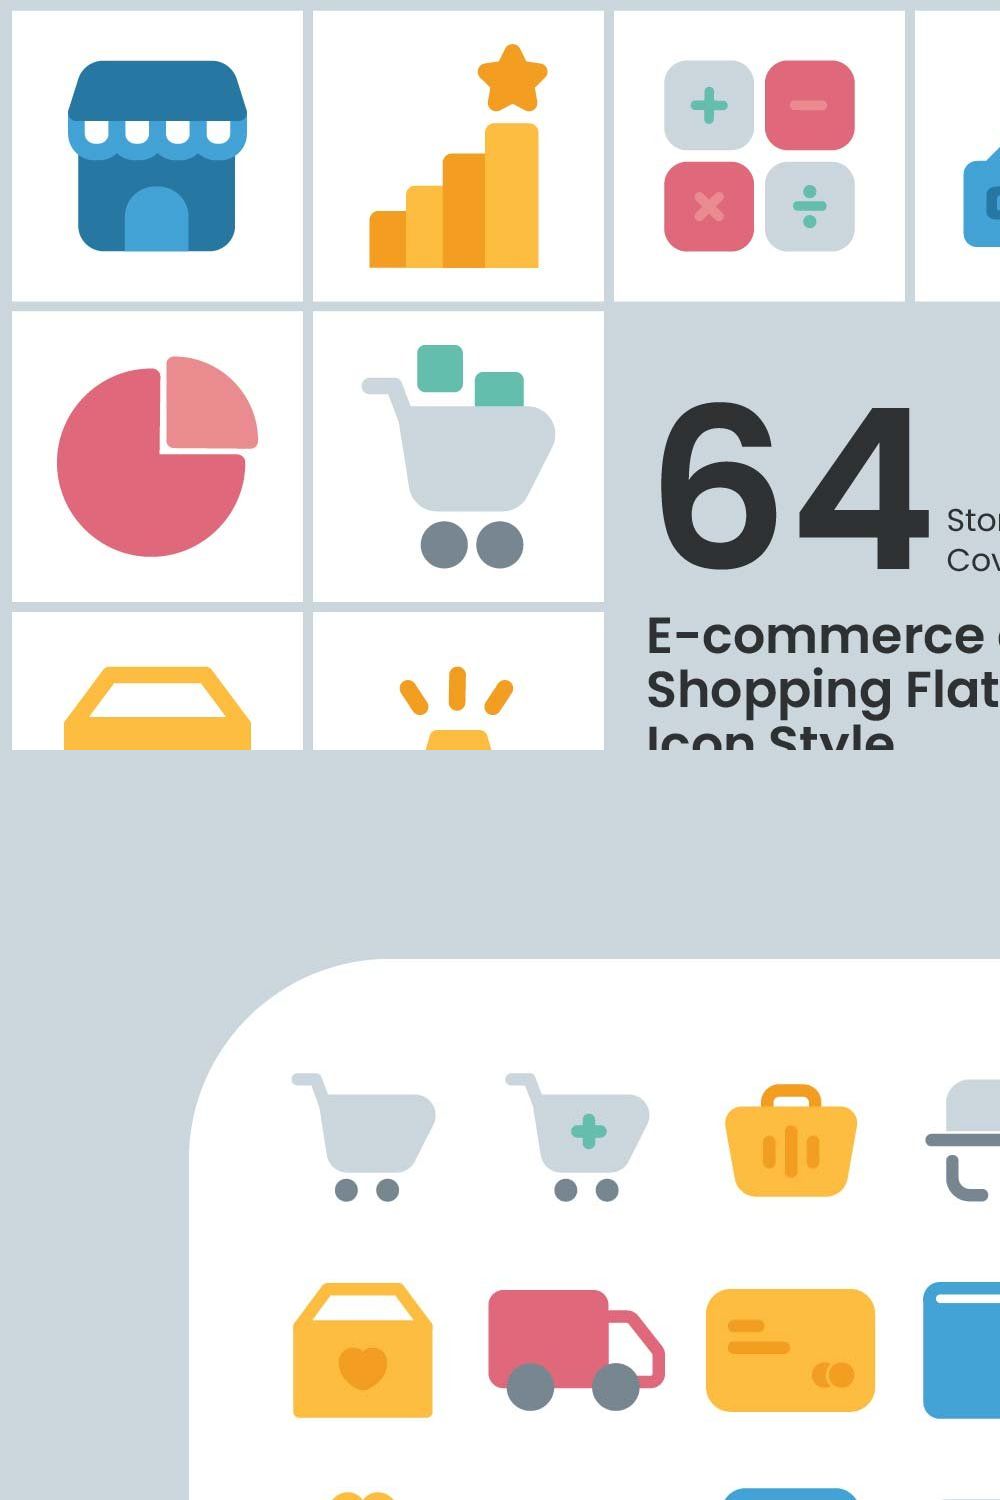 E-commerce and Shopping Flat Icon St pinterest preview image.